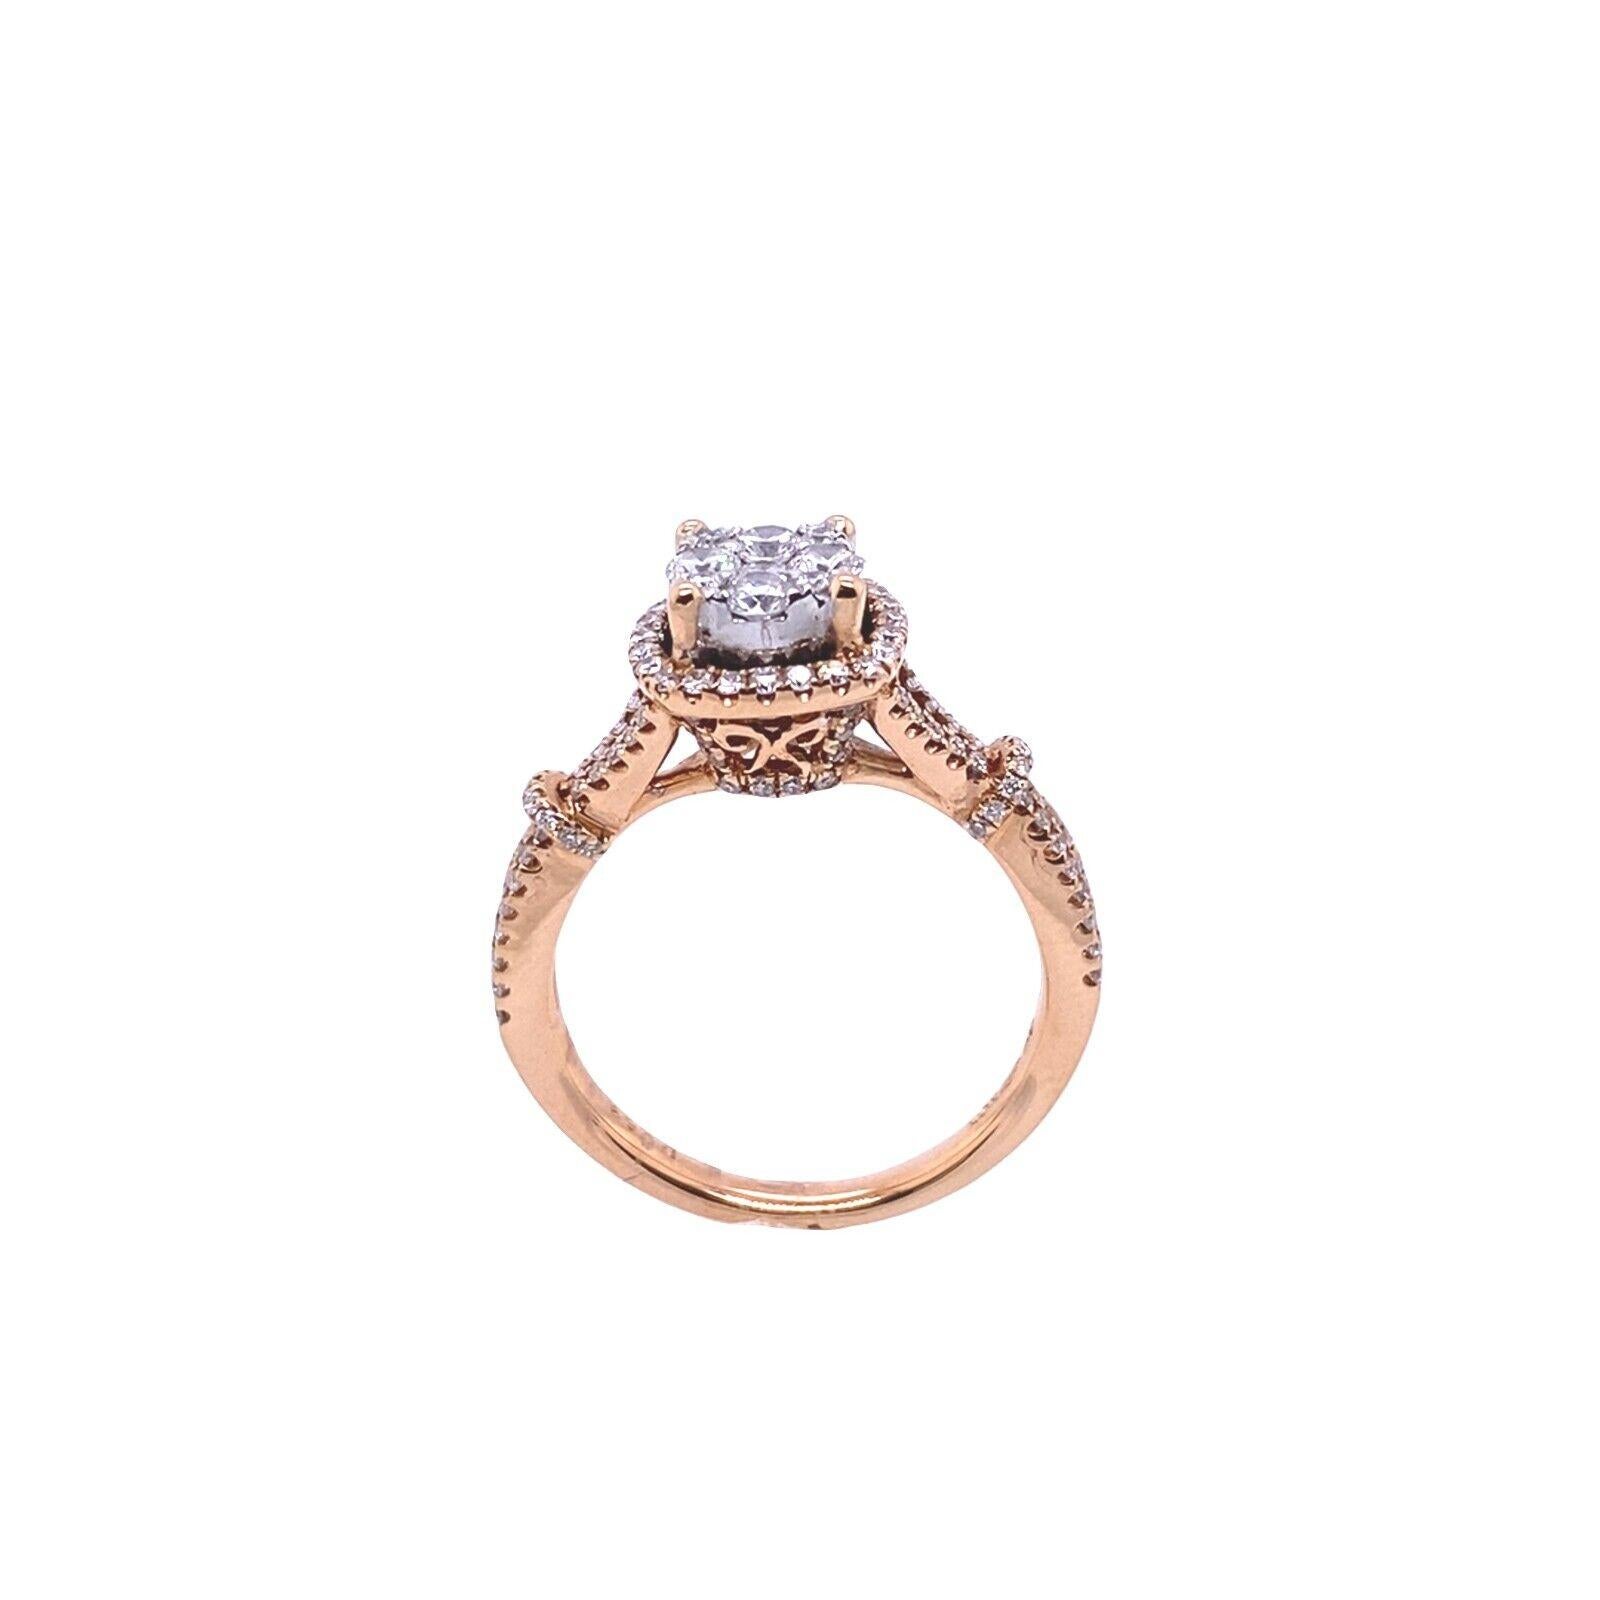 Fine Quality Engagement Ring Set with 0.69ct of G VS Diamonds in 18ct Rose Gold
This unique cluster ring features a 0.69ct round cut diamond set in an 18ct rose gold band. The round cut diamond is surrounded by a cluster of diamonds, to create an